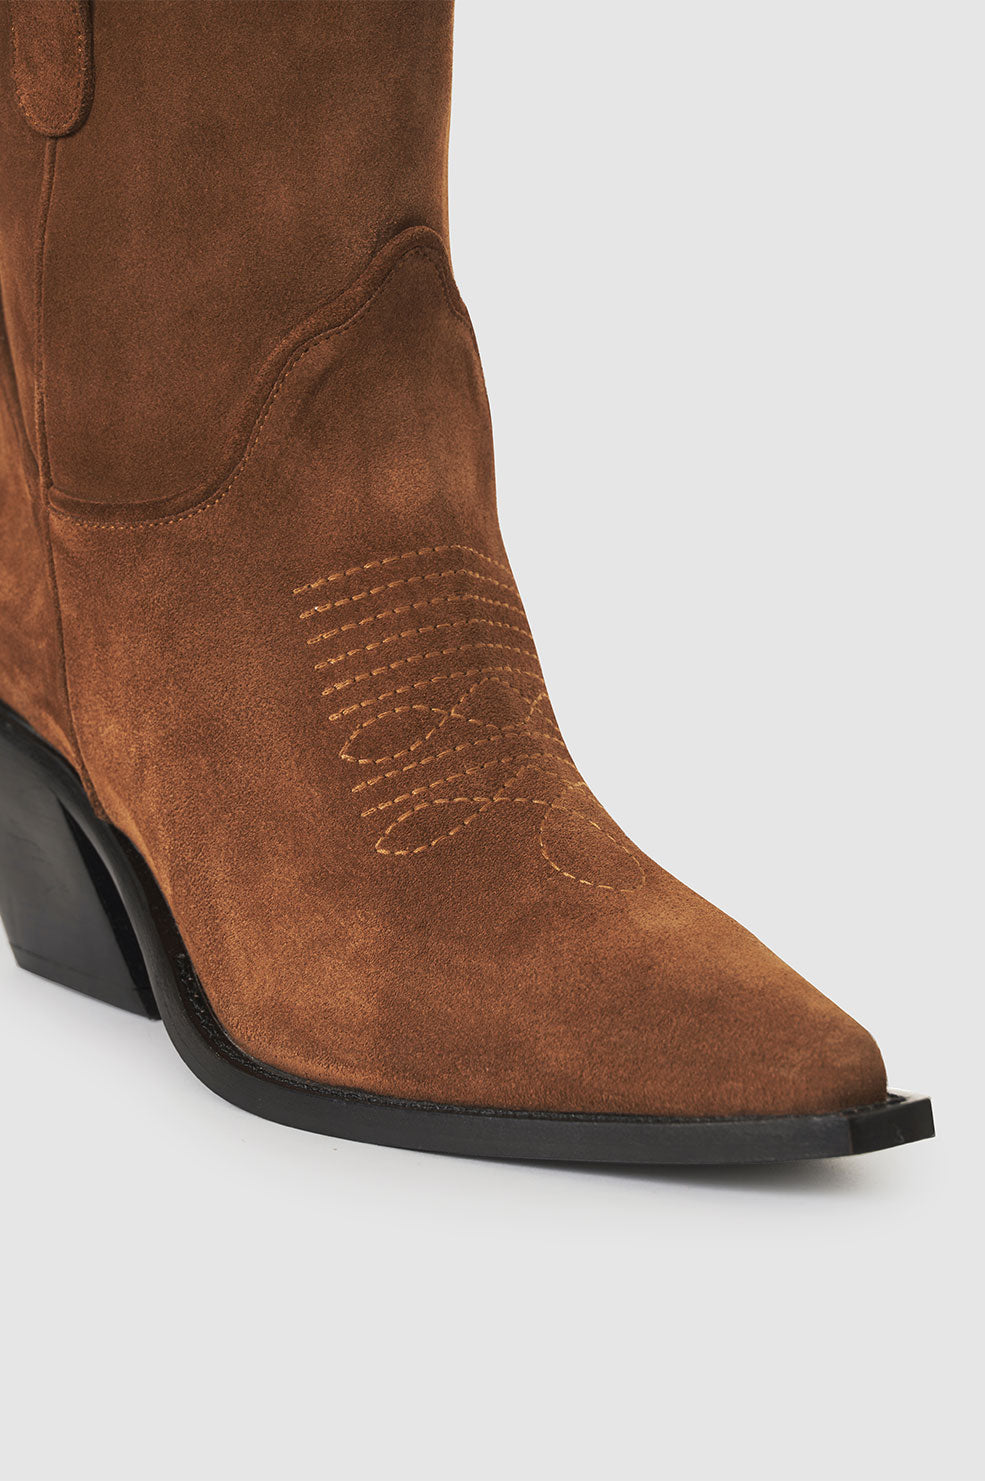 Anine Bing | Mid Tania Boots - Toffee Suede